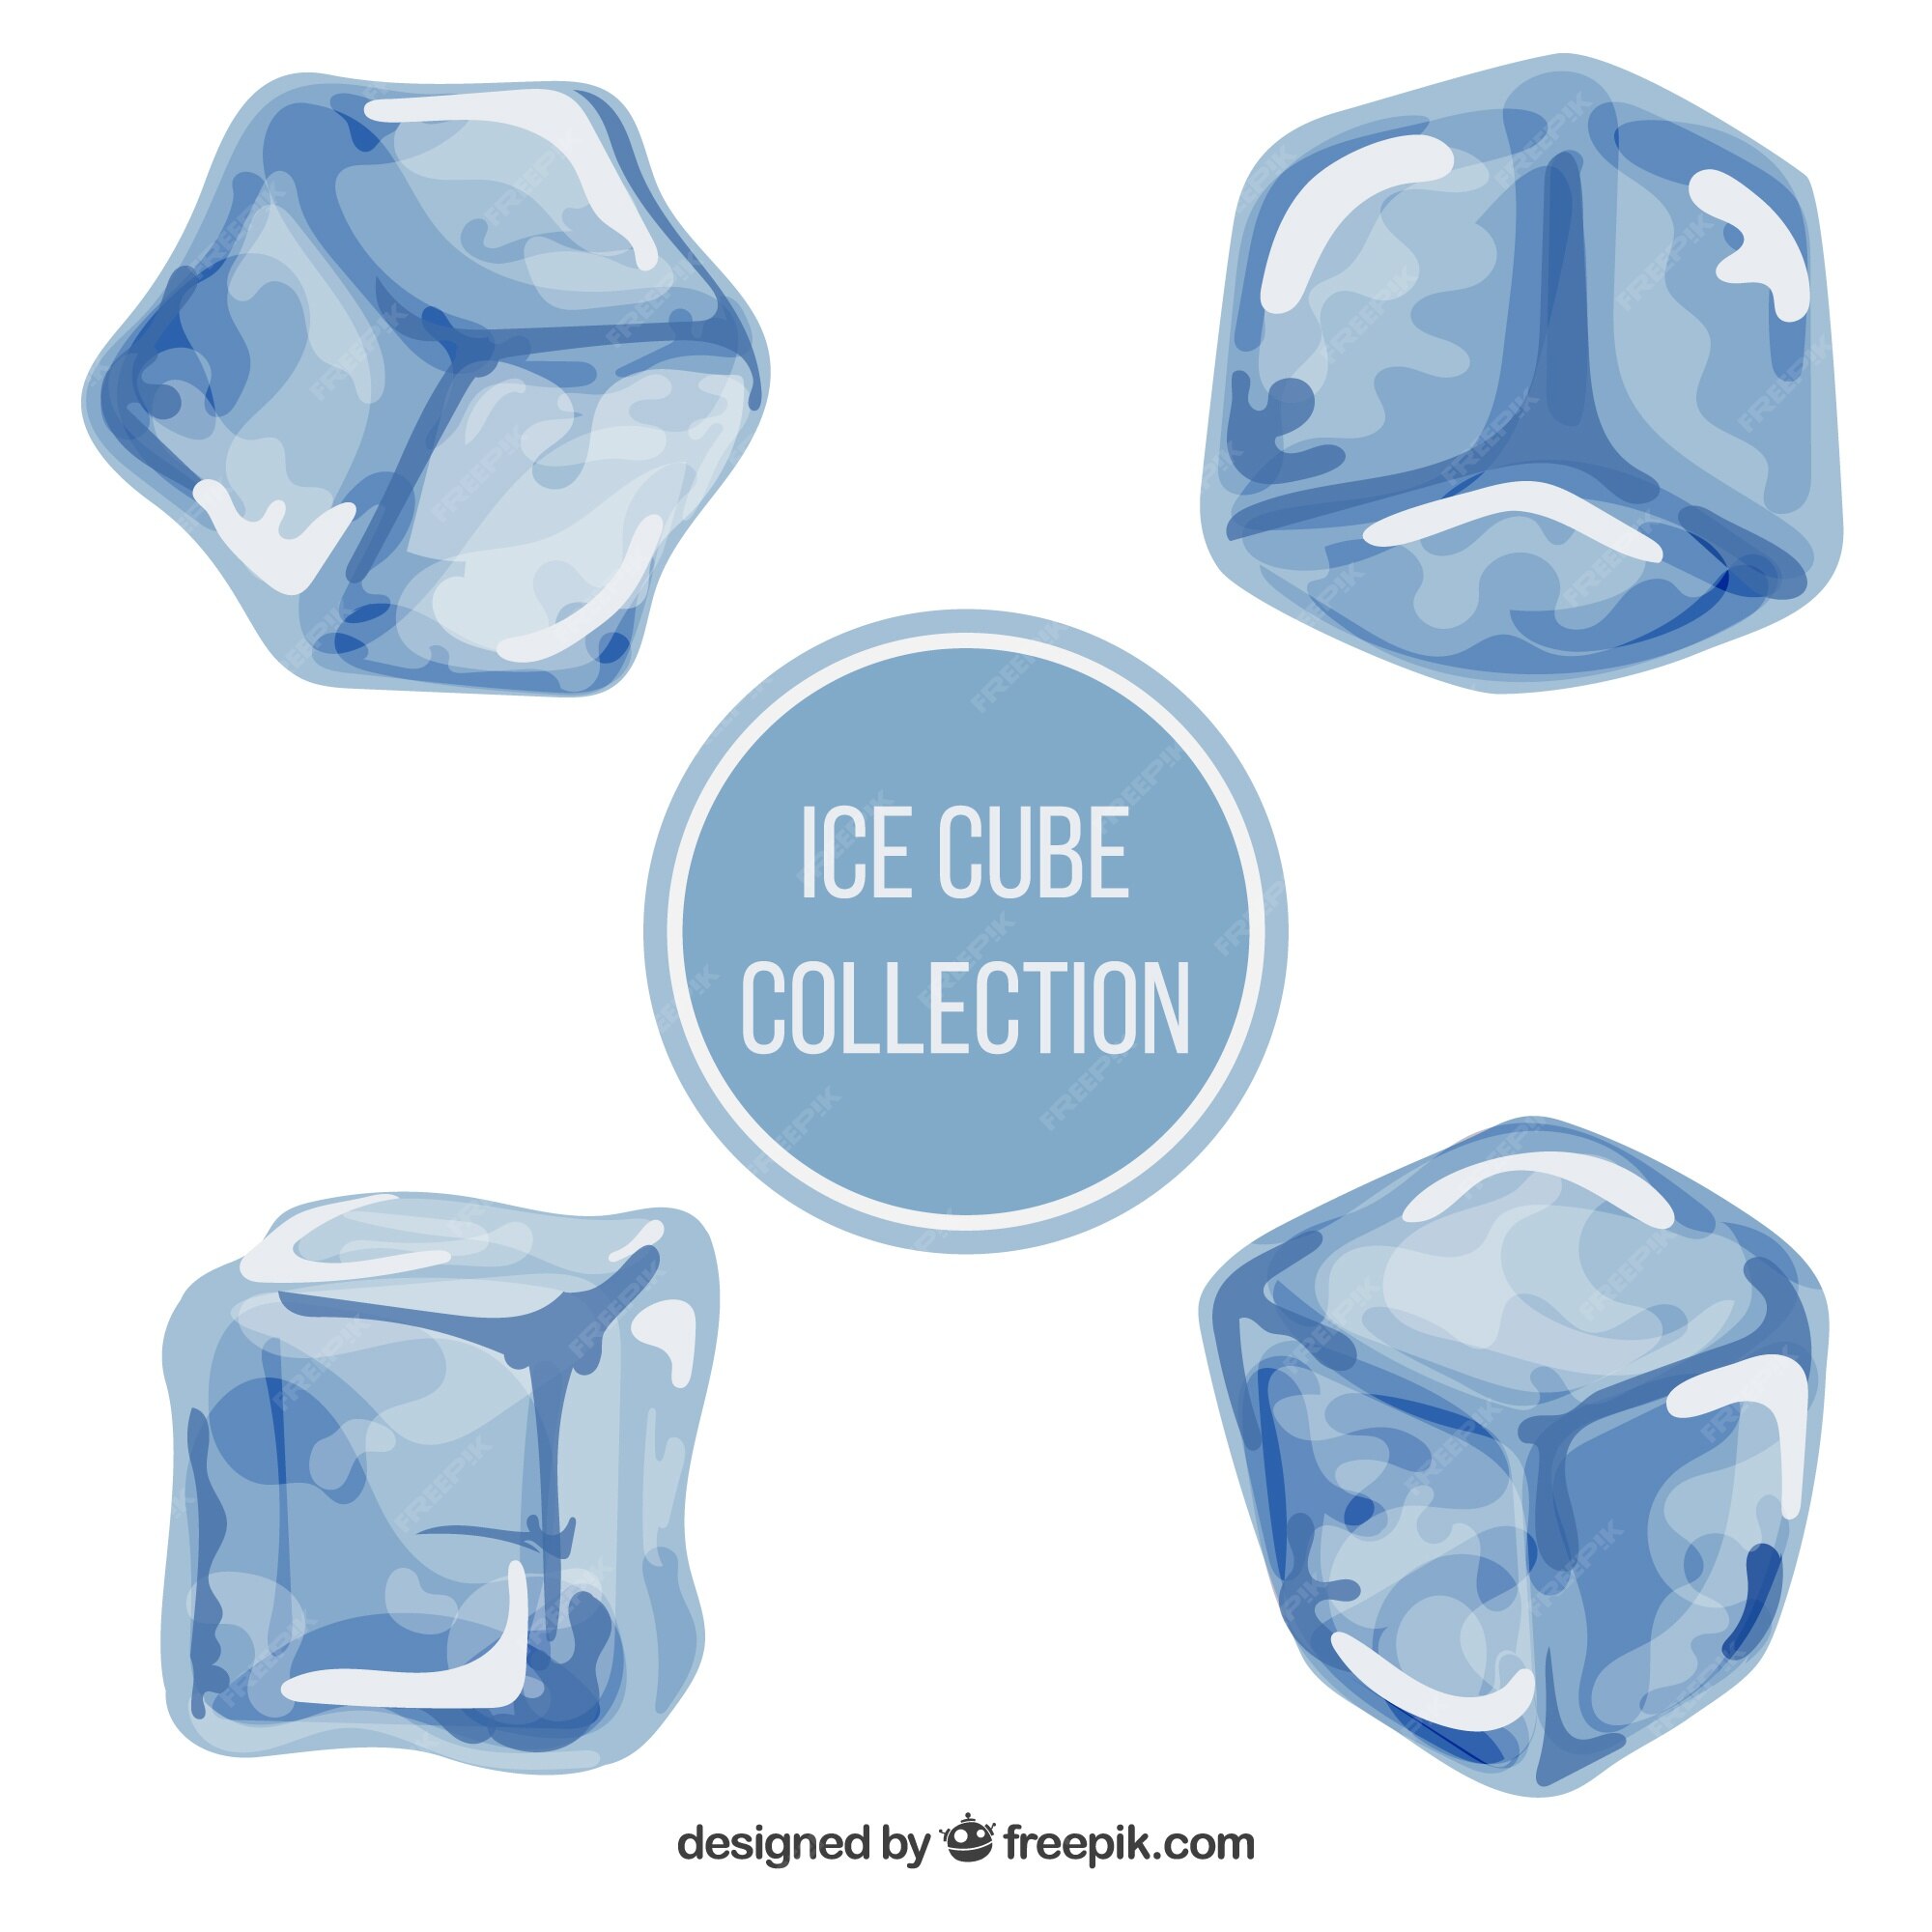 https://img.freepik.com/free-vector/ice-cube-collection-with-flat-design_23-2147853234.jpg?w=2000